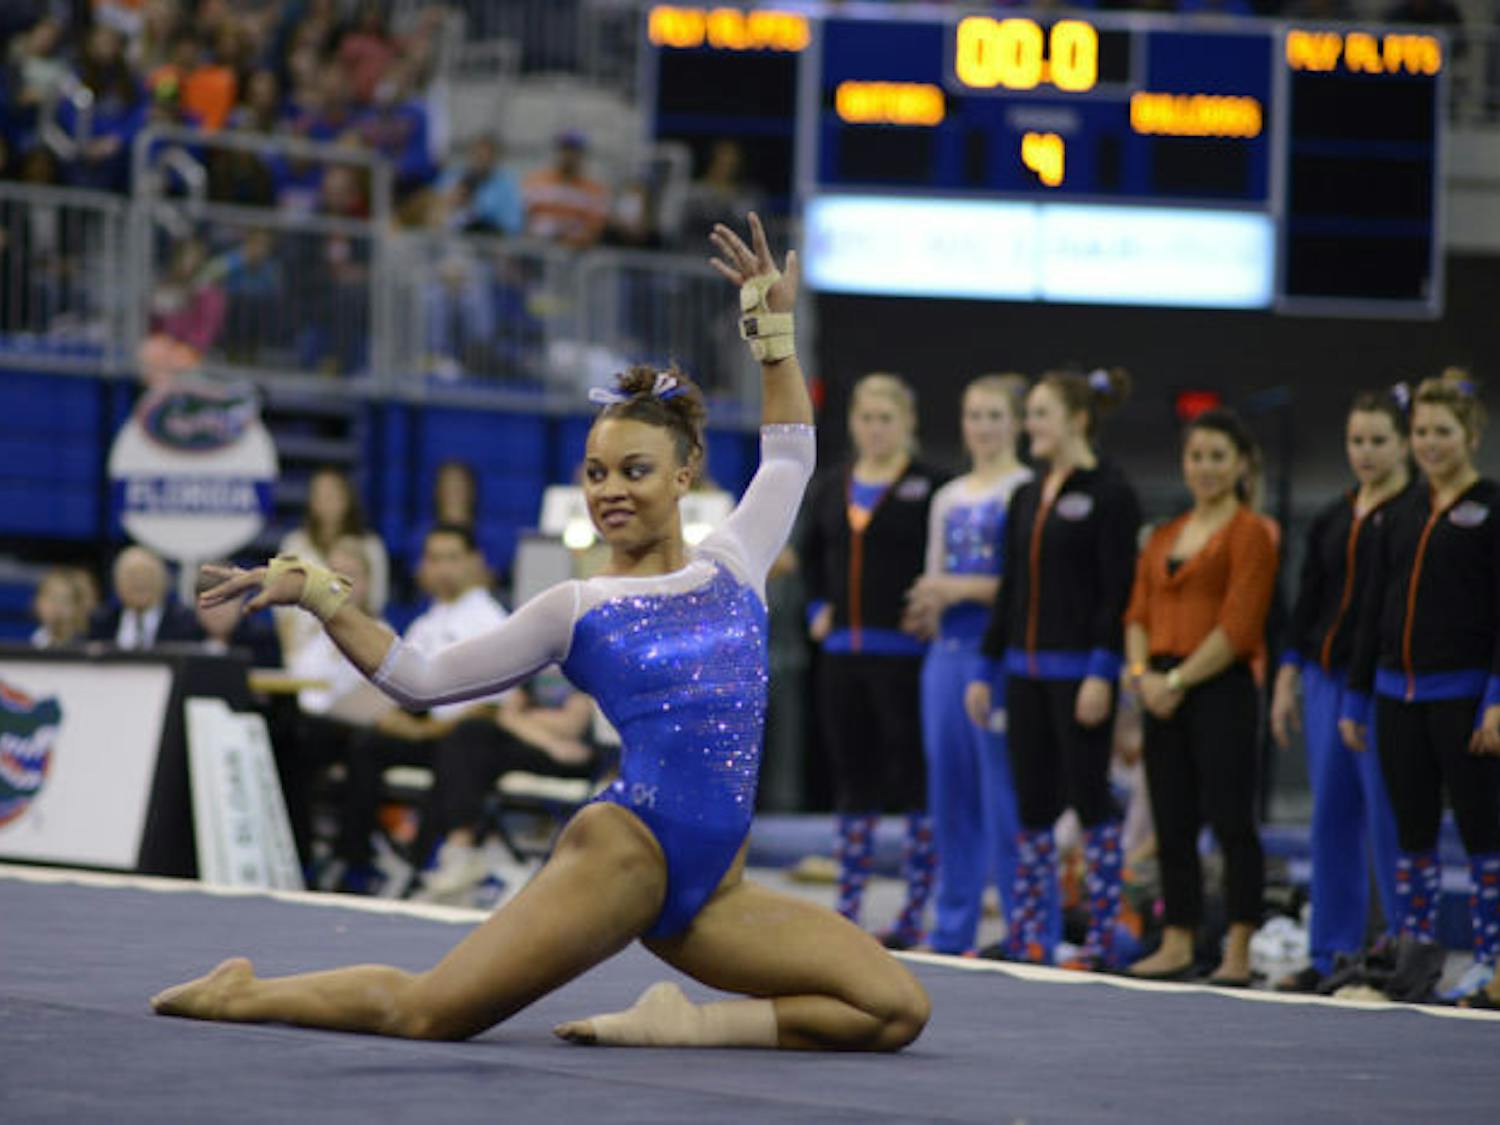 Kytra Hunter performs her floor routine on Friday in the O’Connell Center. Hunter scored a perfect 10 on the routine. Her performance followed fellow UF gymnast Bridget Sloan’s perfect floor routine — the first back-to-back 10s in an event for UF in almost 18 years.